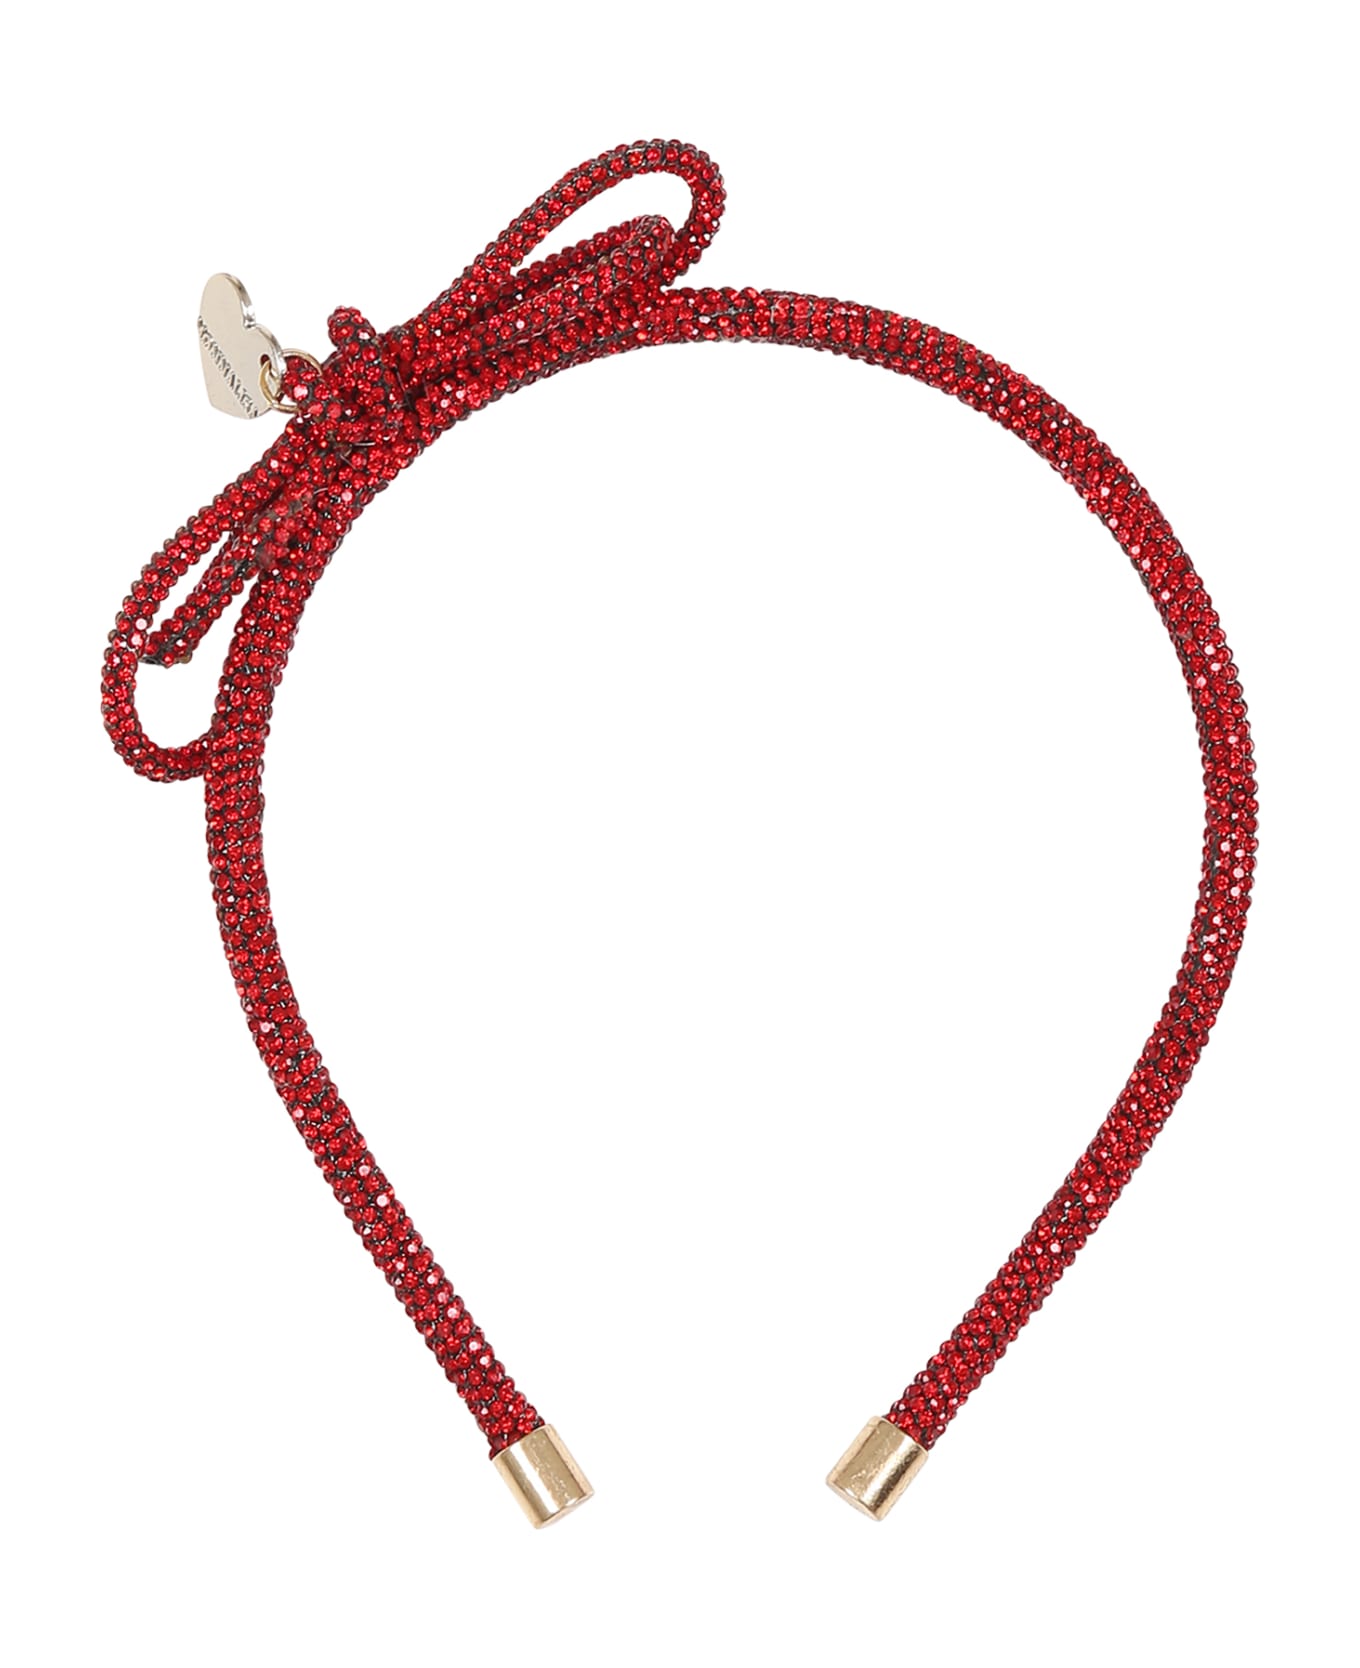 Monnalisa Red Headband For Girl With Bow - Red アクセサリー＆ギフト